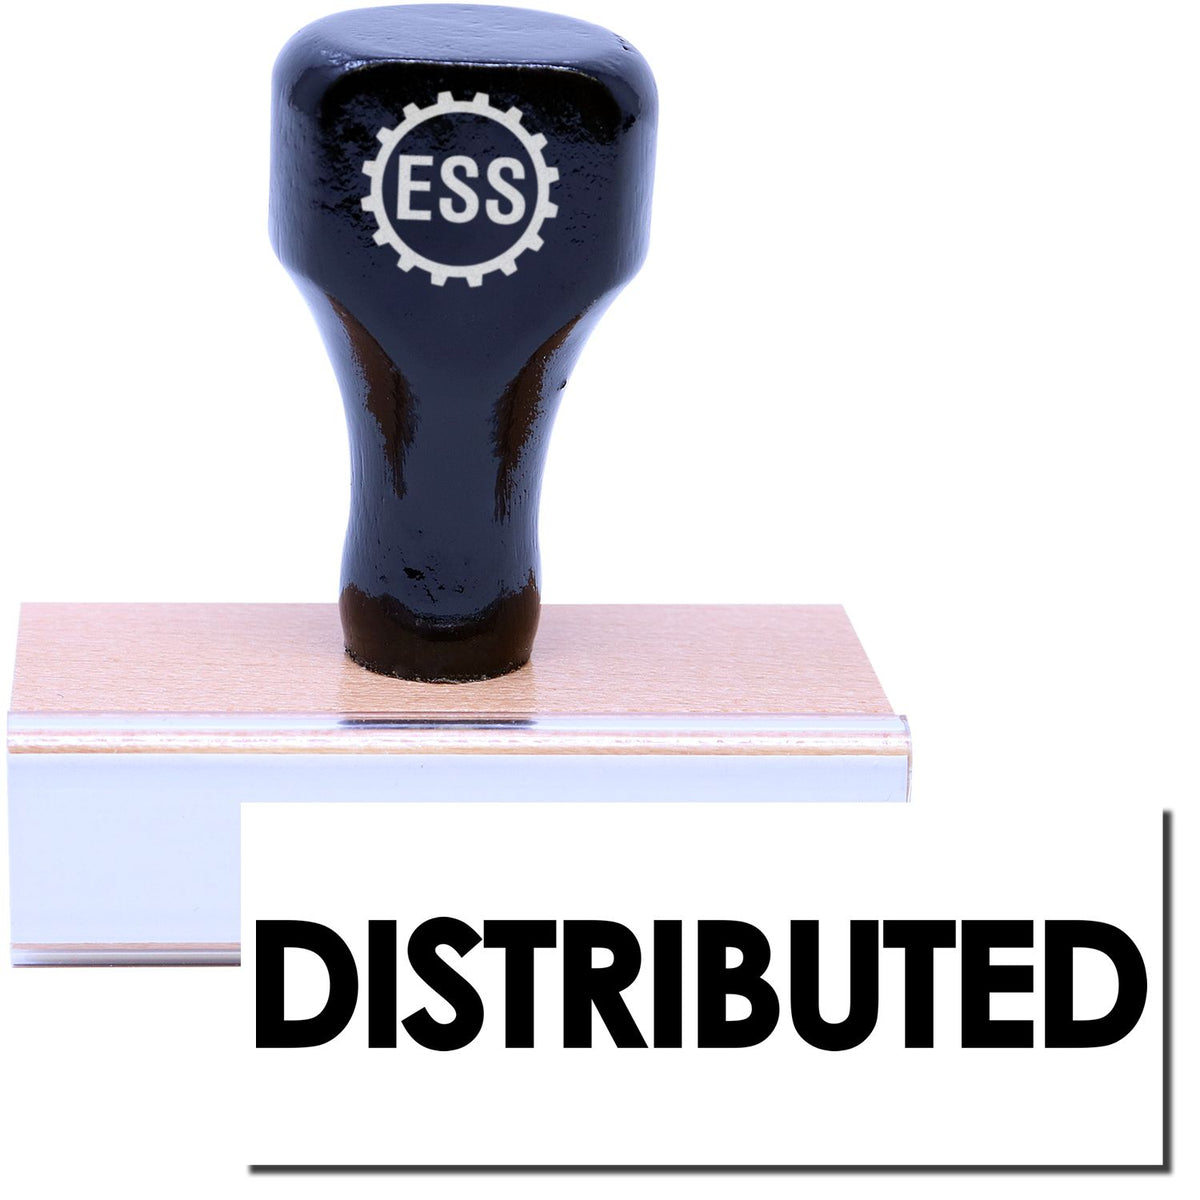 A stock office rubber stamp with a stamped image showing how the text &quot;DISTRIBUTED&quot; in a large bold font is displayed after stamping.